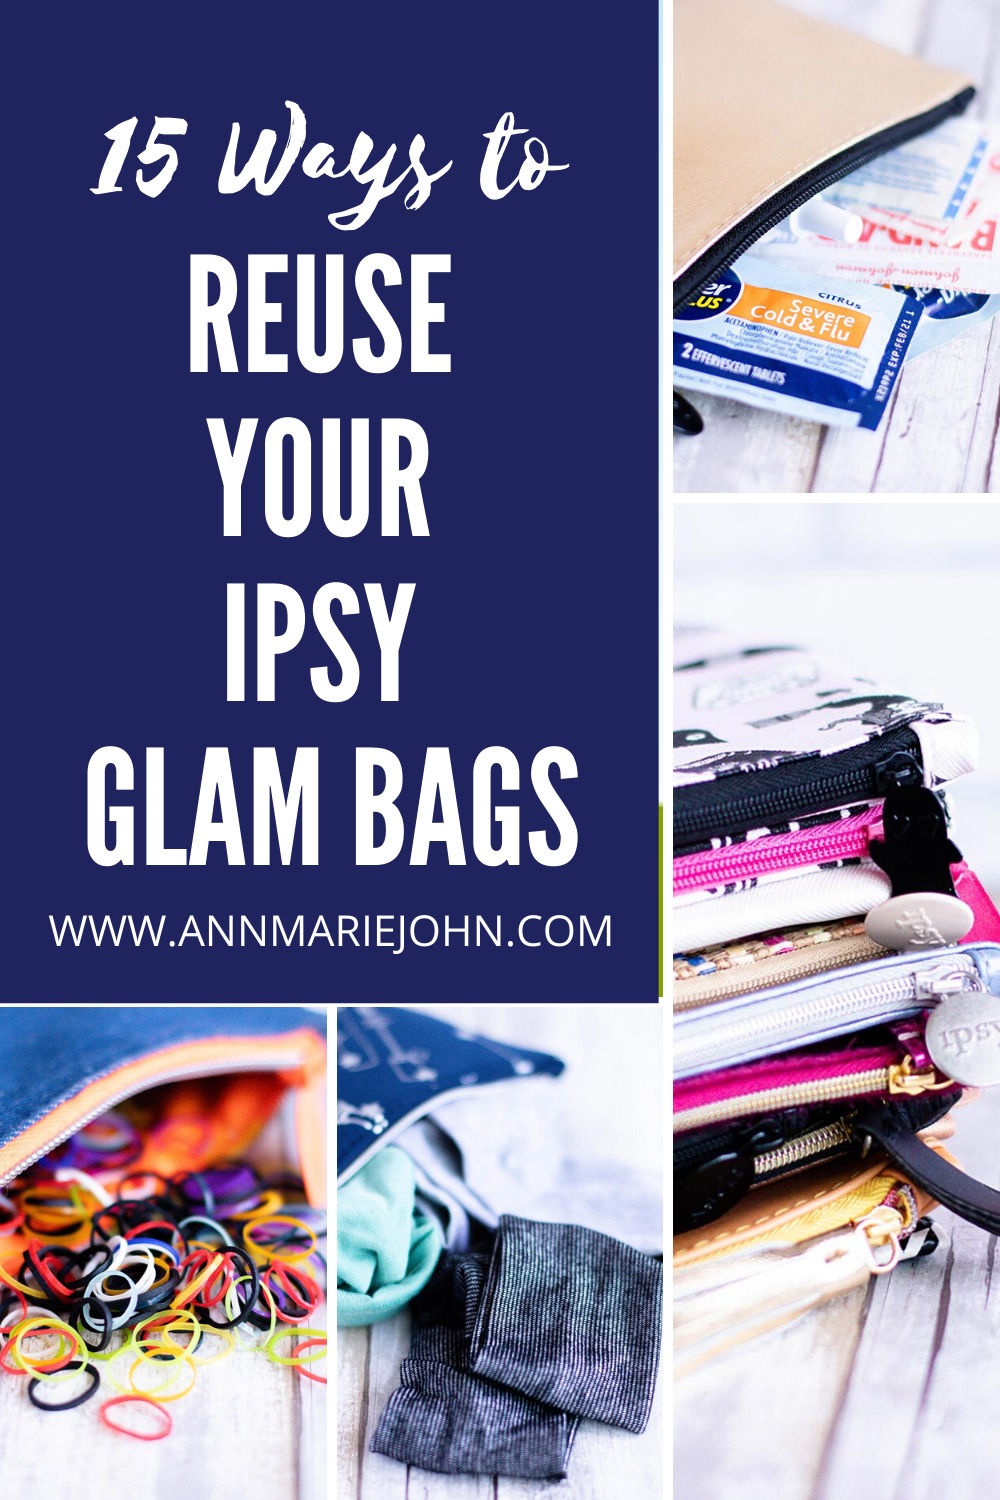 Ways to Reuse your Ipsy Glam Bags